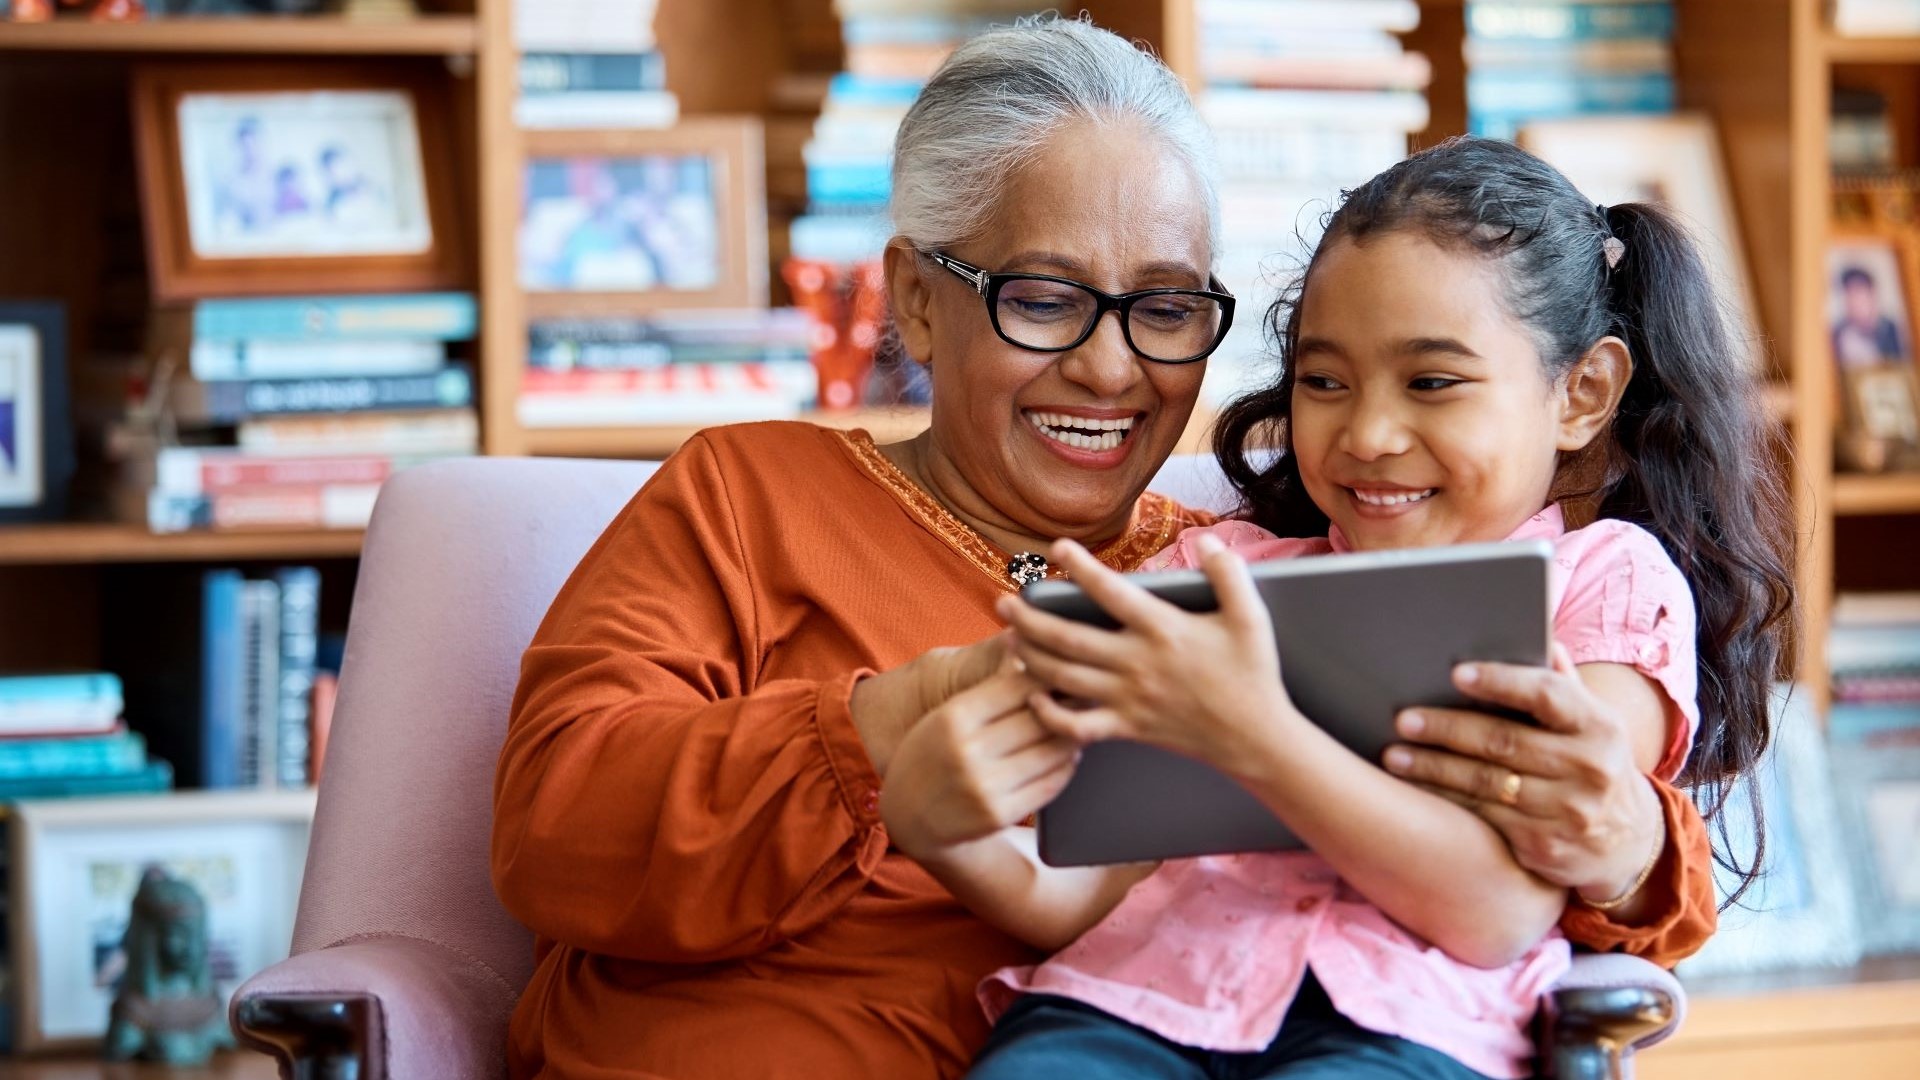 Grandmother looking at a tablet with young girl on her lap